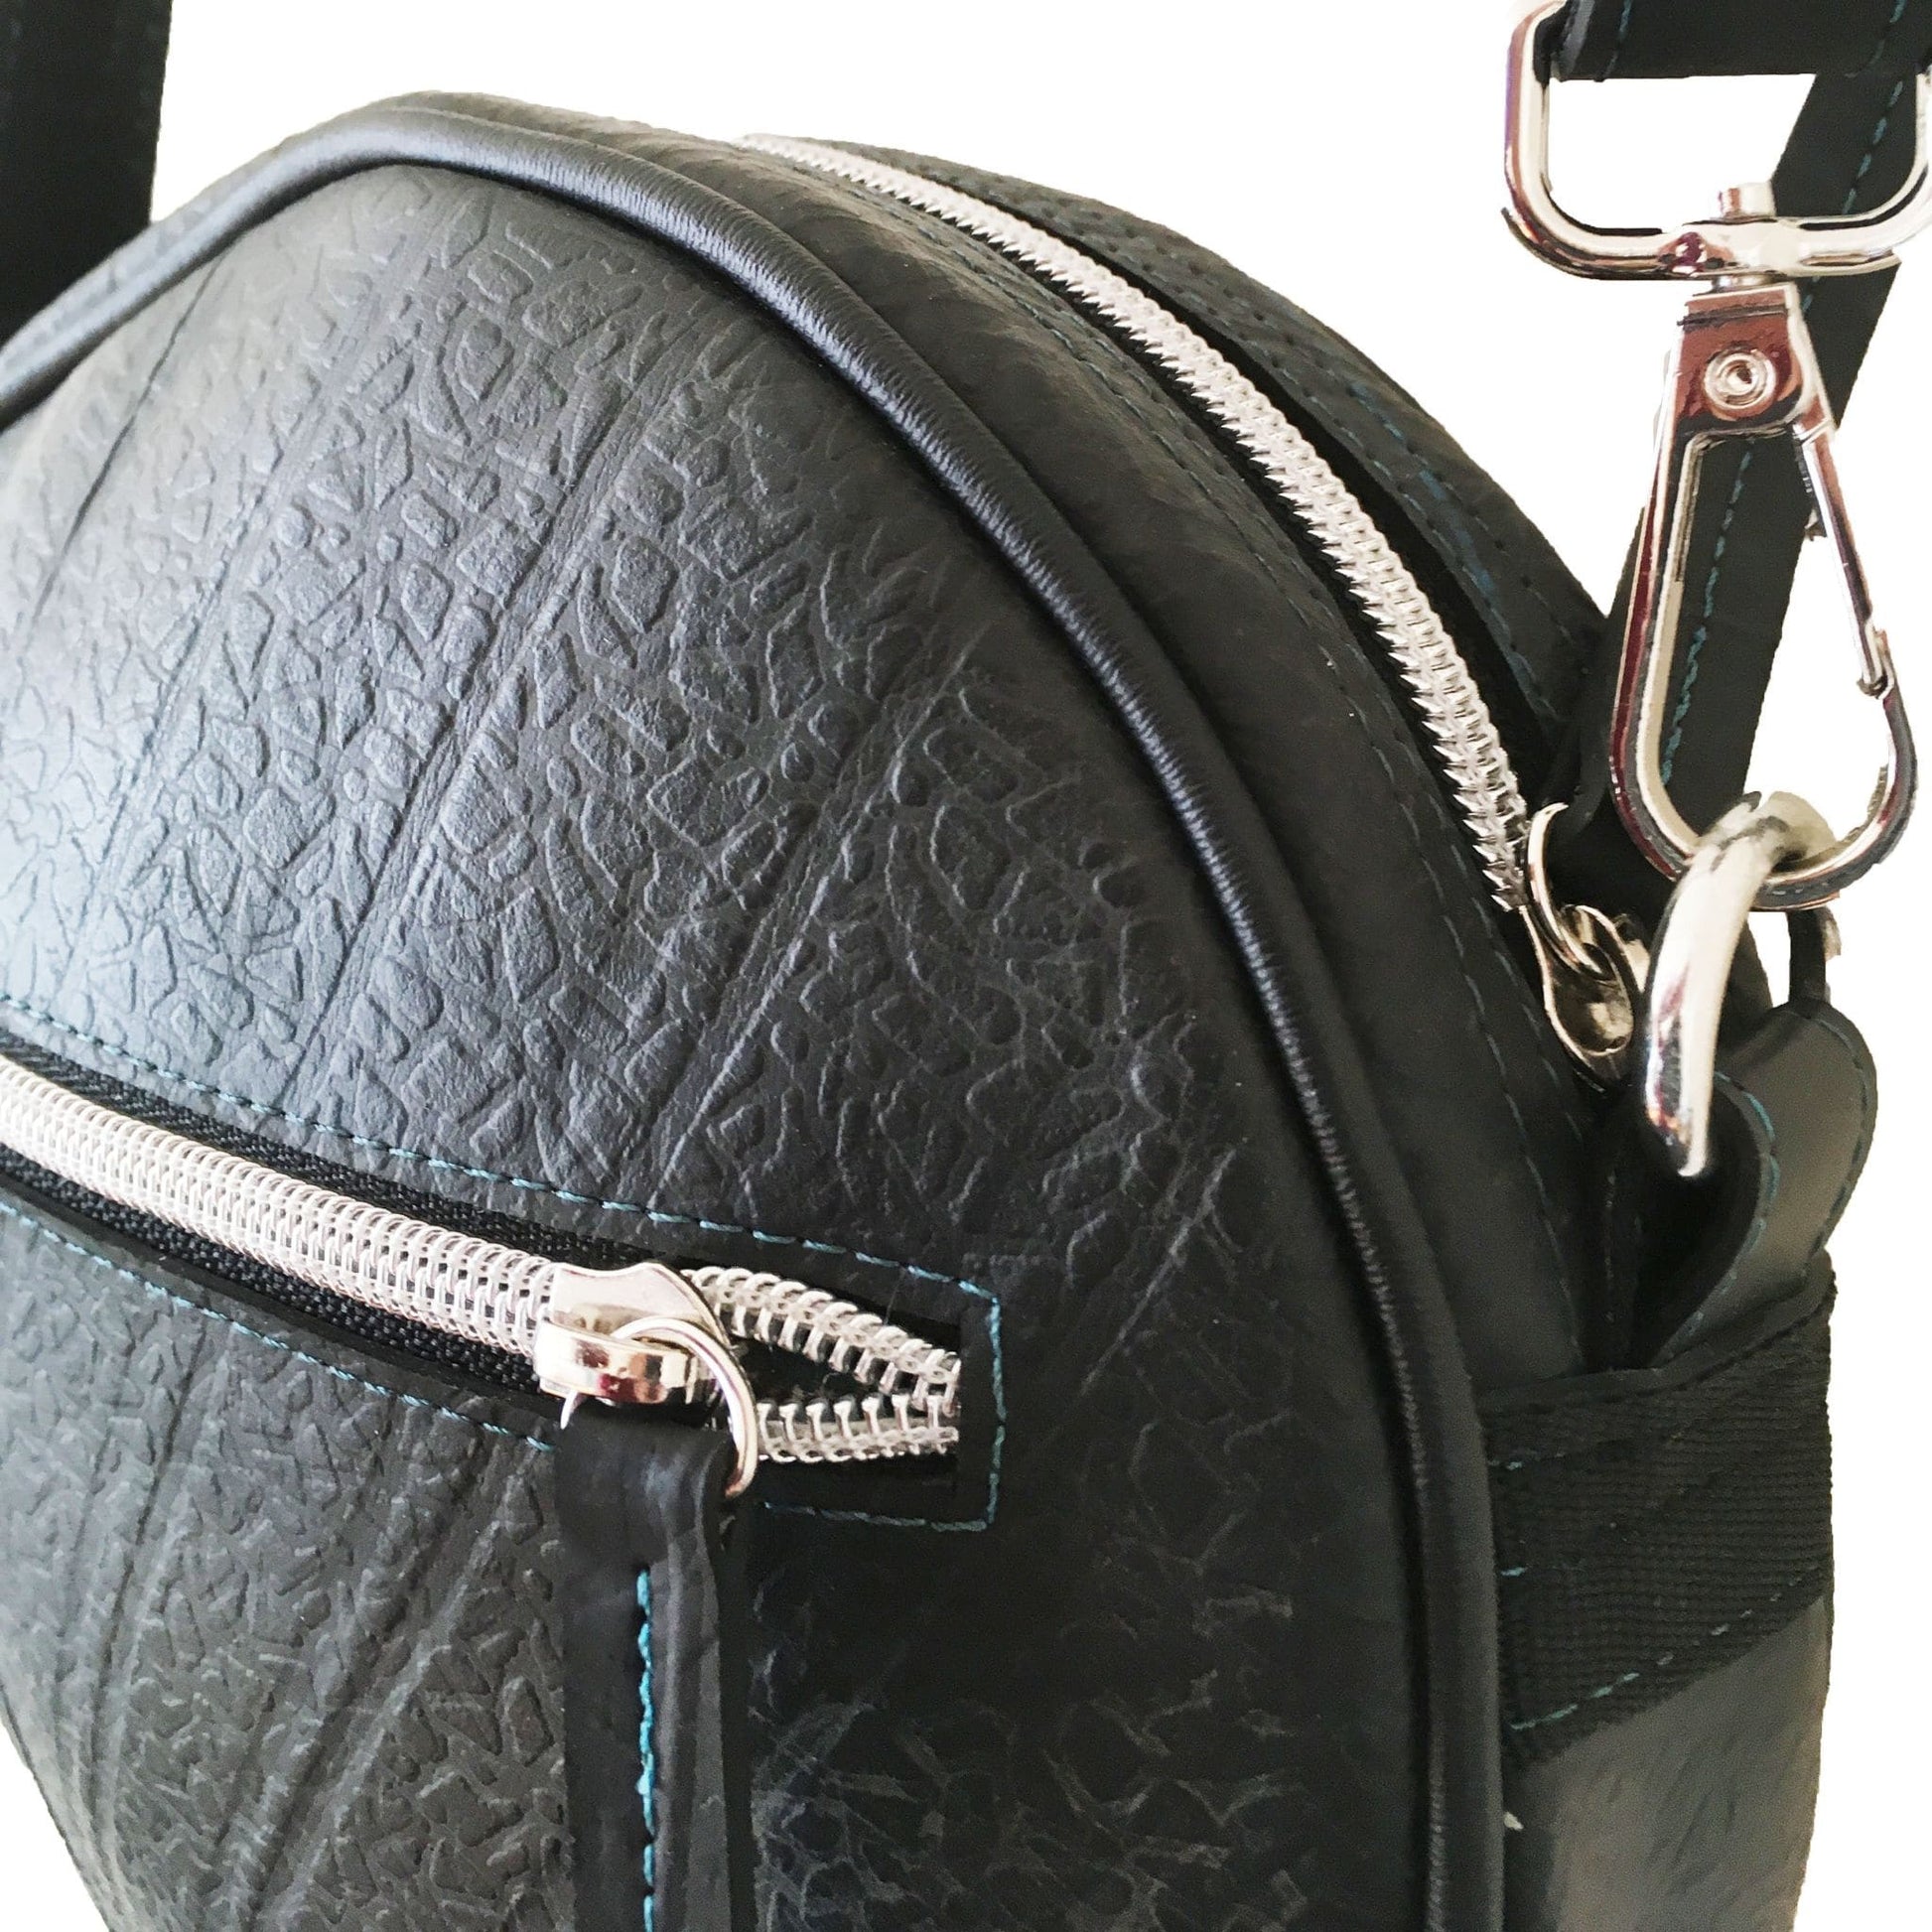 Sirius Round Bag made from Recycled Tyres - close up